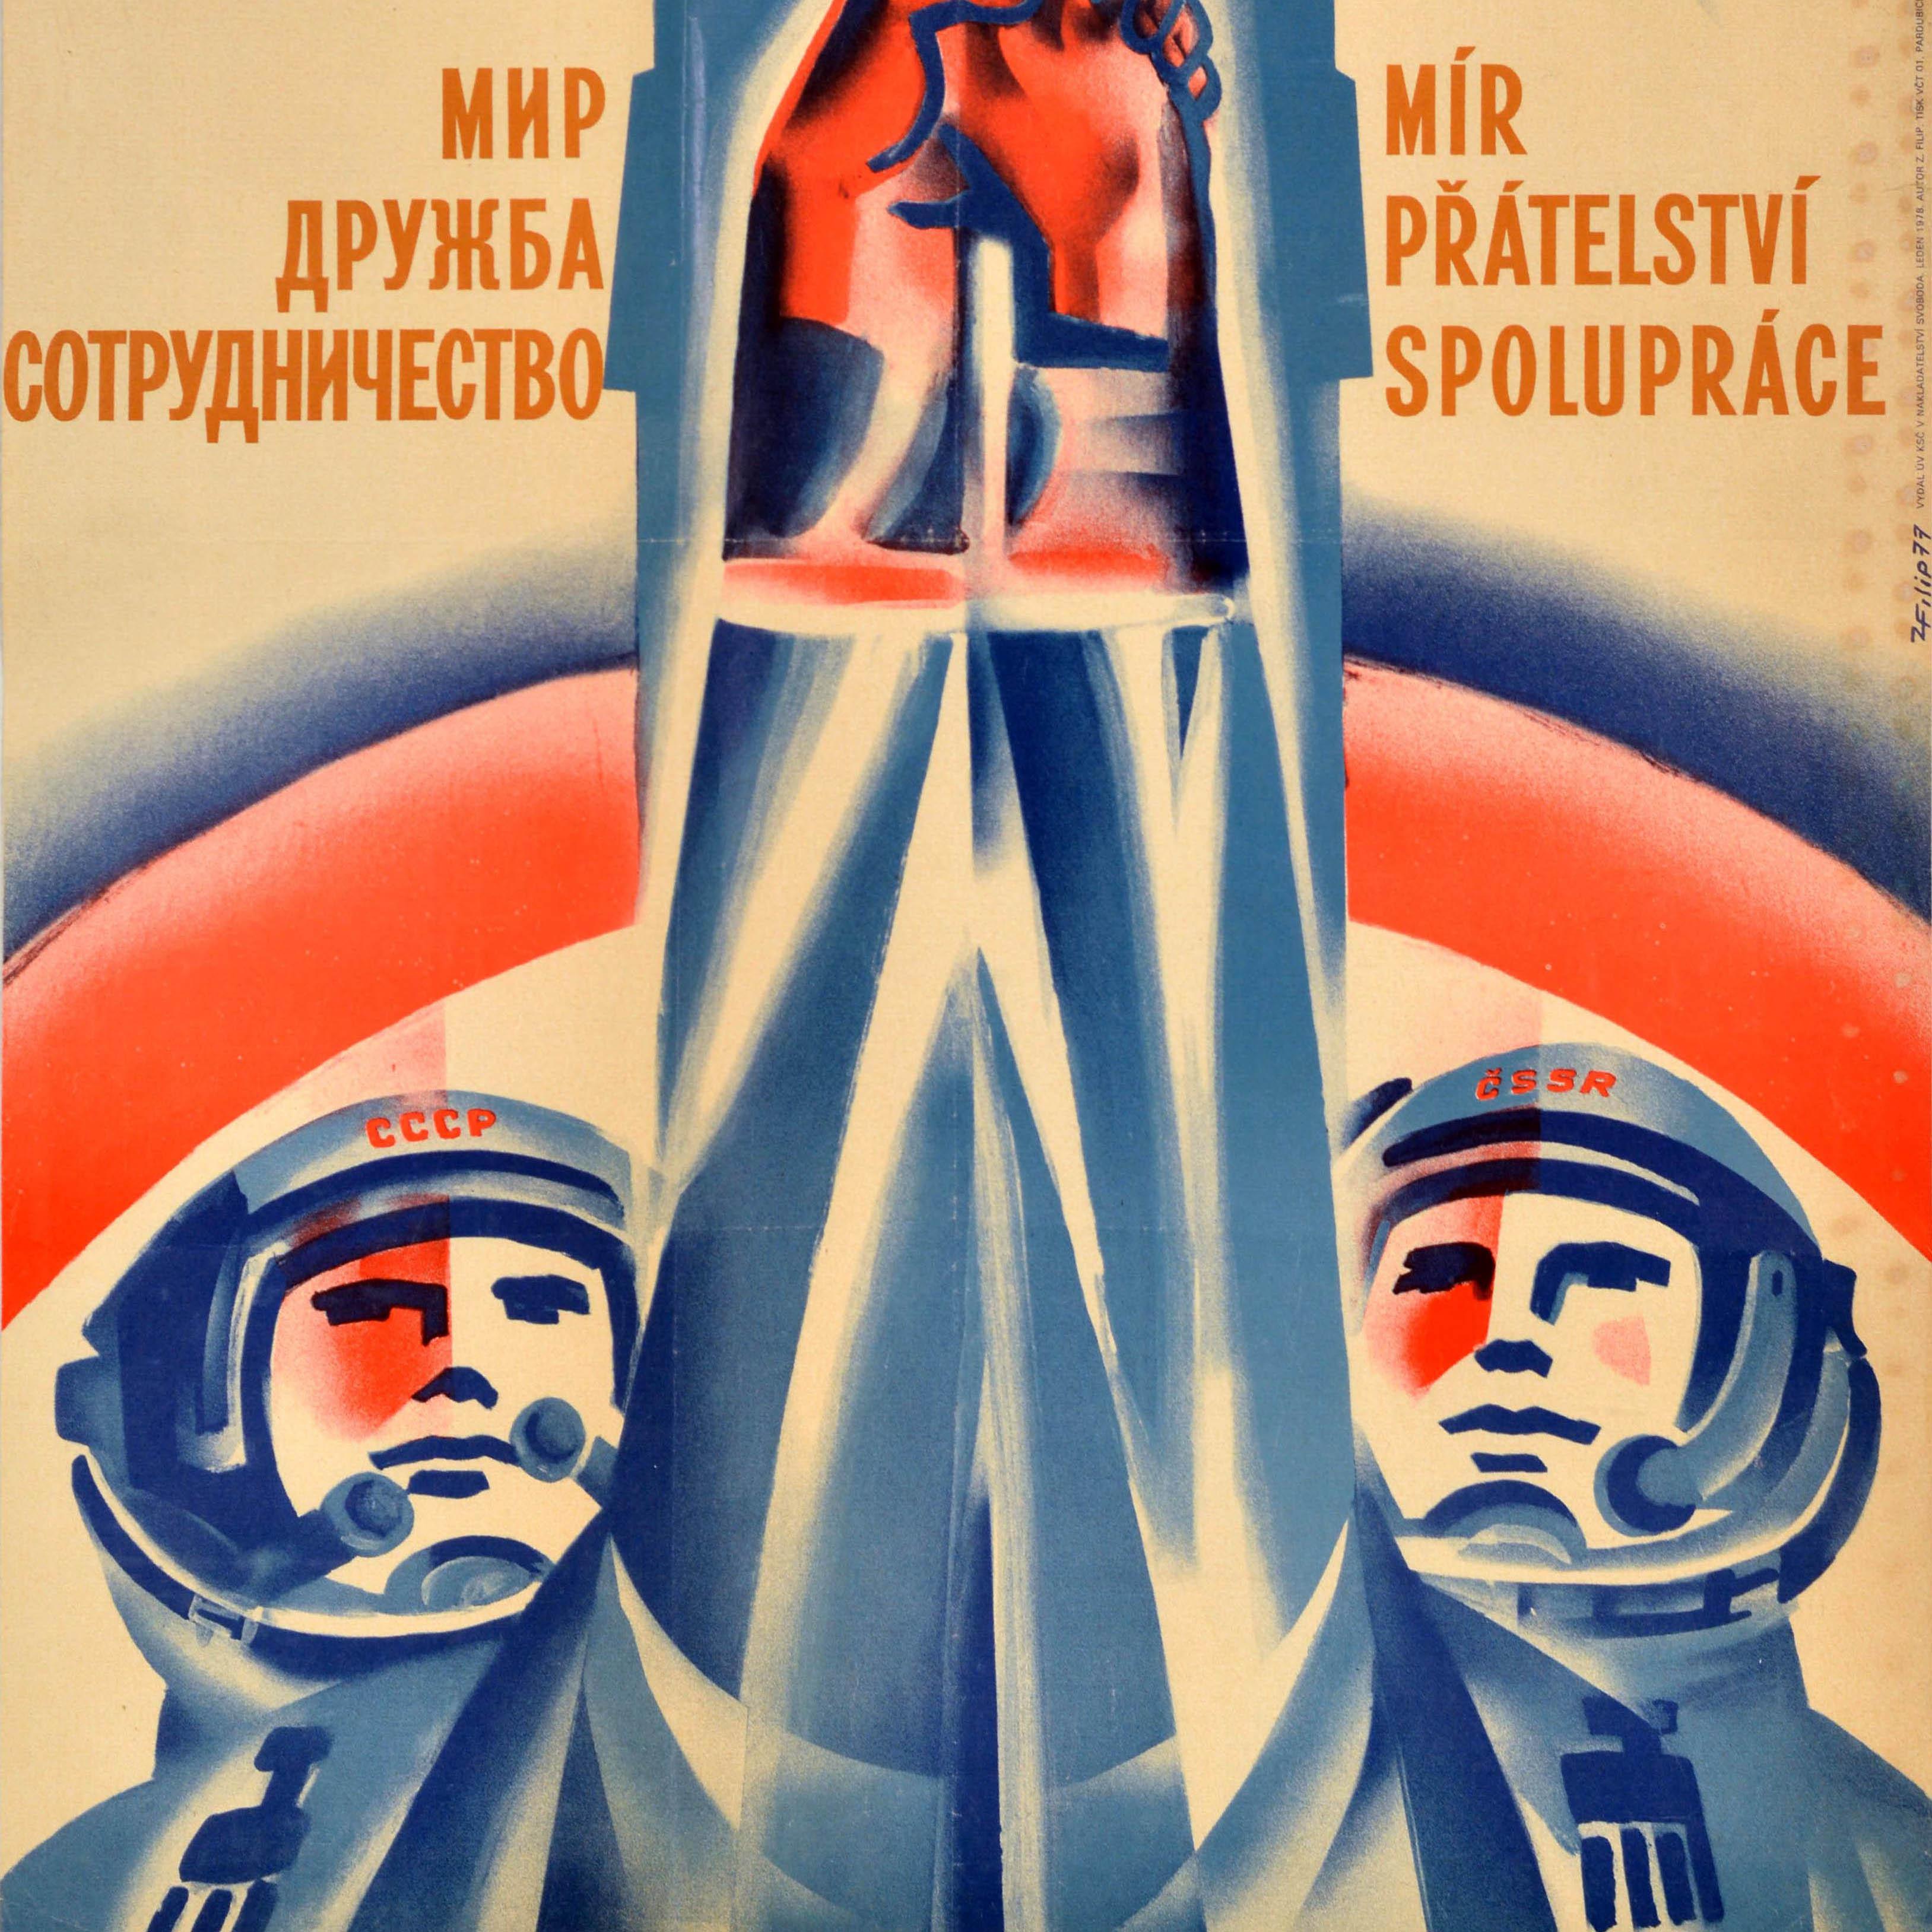 Original vintage Soviet propaganda poster featuring an illustration of two cosmonauts with USSR and Czech SSR on the helmets of their space suits, holding their hands up together against a rocket in the background with the caption in Russian and